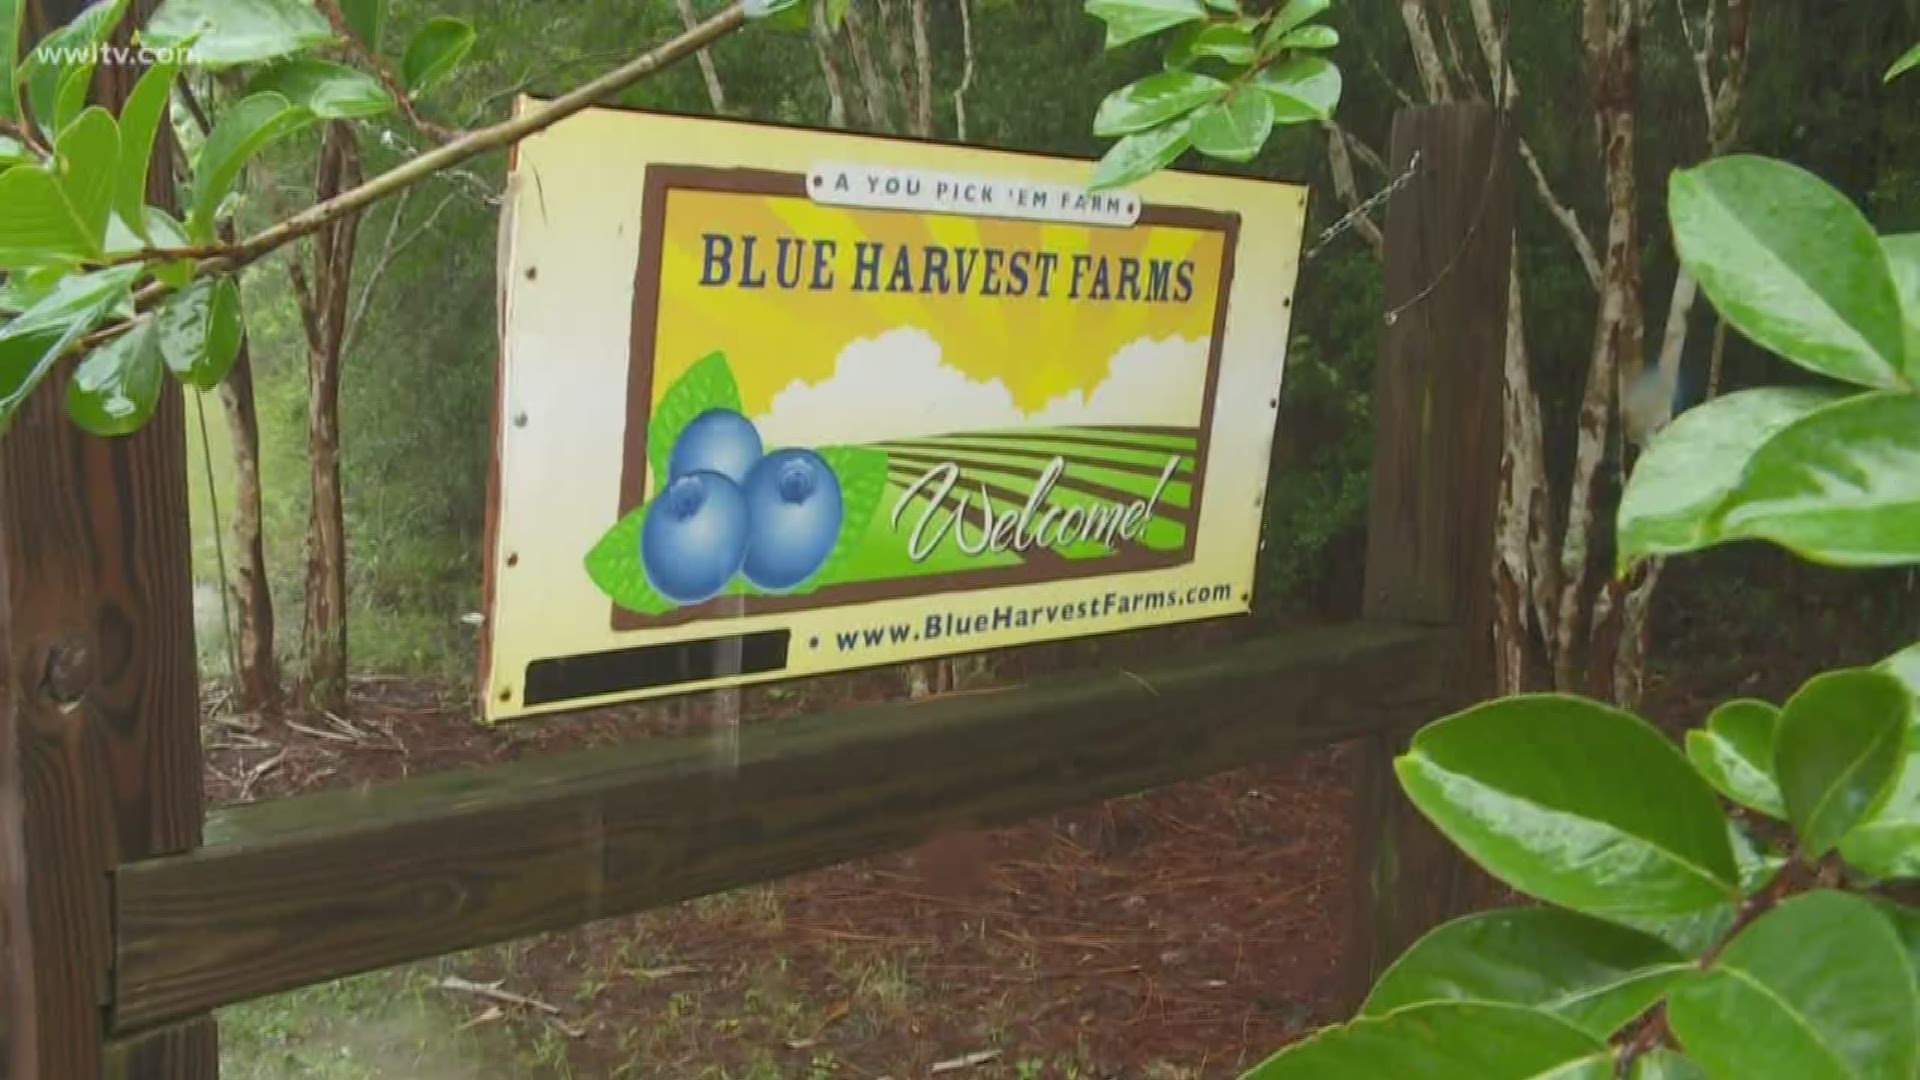 In this episode, we are featuring Blue Harvest Farms. When we visited it was pouring down rain, but that didn't stop the fun.